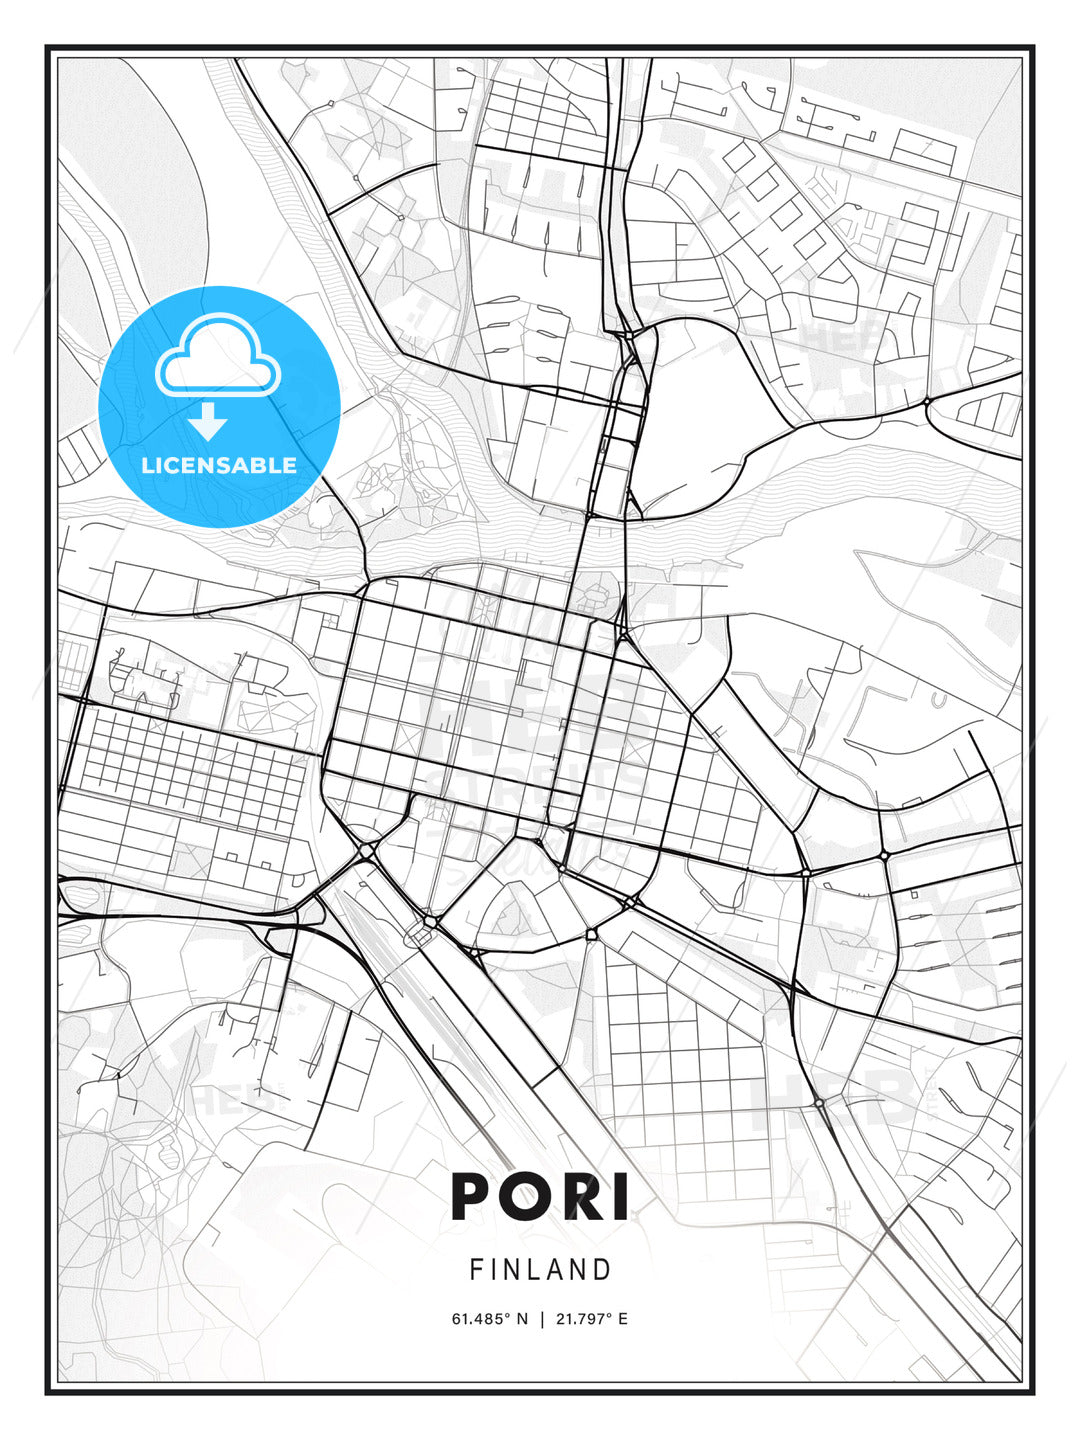 Pori, Finland, Modern Print Template in Various Formats - HEBSTREITS Sketches